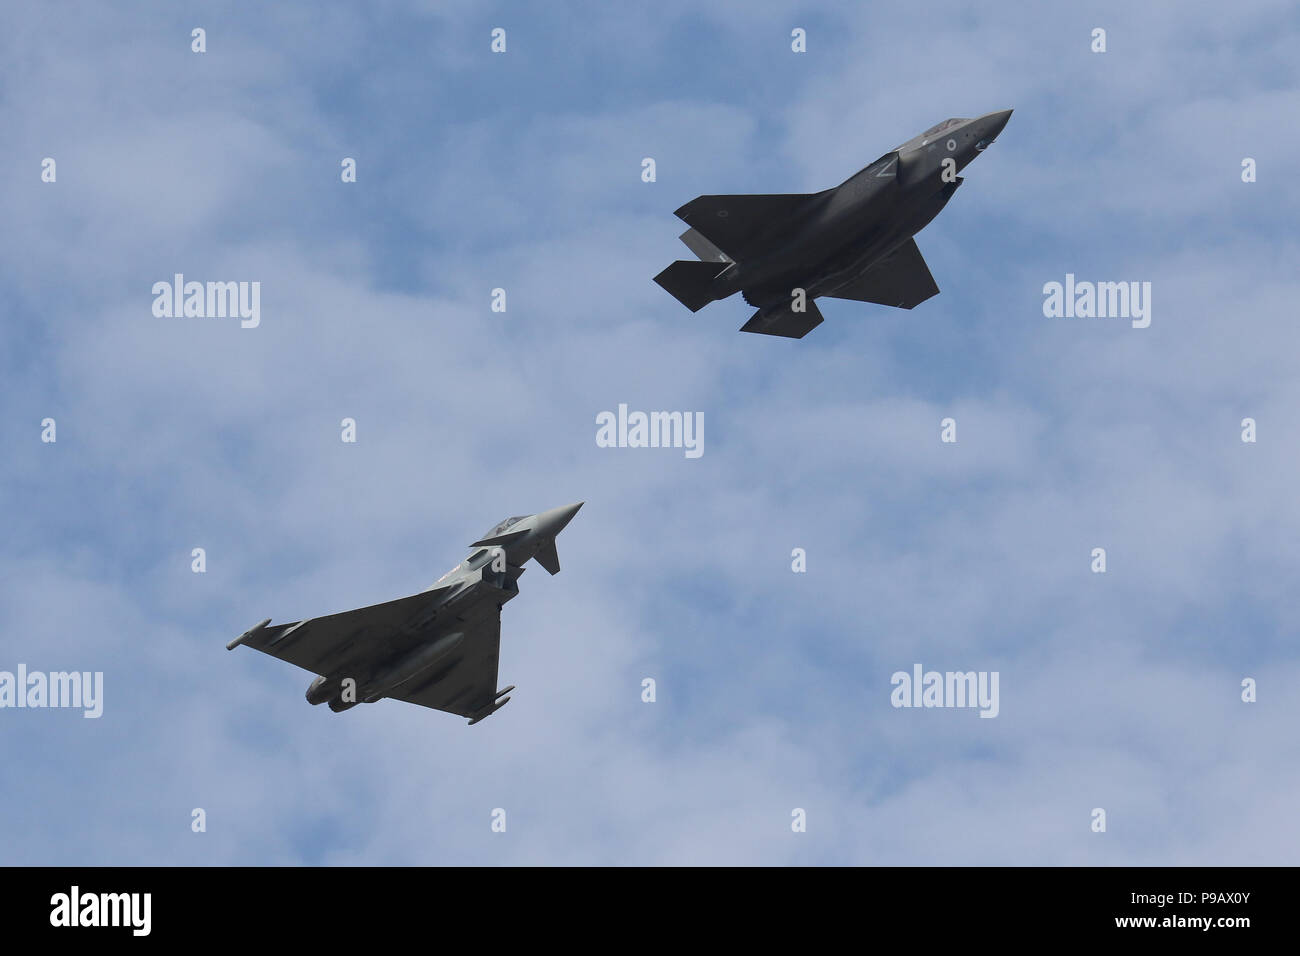 Farnborough, UK. 16th July 2018. A Royal Air Force Lockheed Martin F-35B and Eurofighter Typhoon perform a flypast on the opening day of the 2018 Farnborough International Airshow, one of the biggest aviation trade and industry events in the world, held in the UK. Credit: James Hancock/Alamy Live News Stock Photo